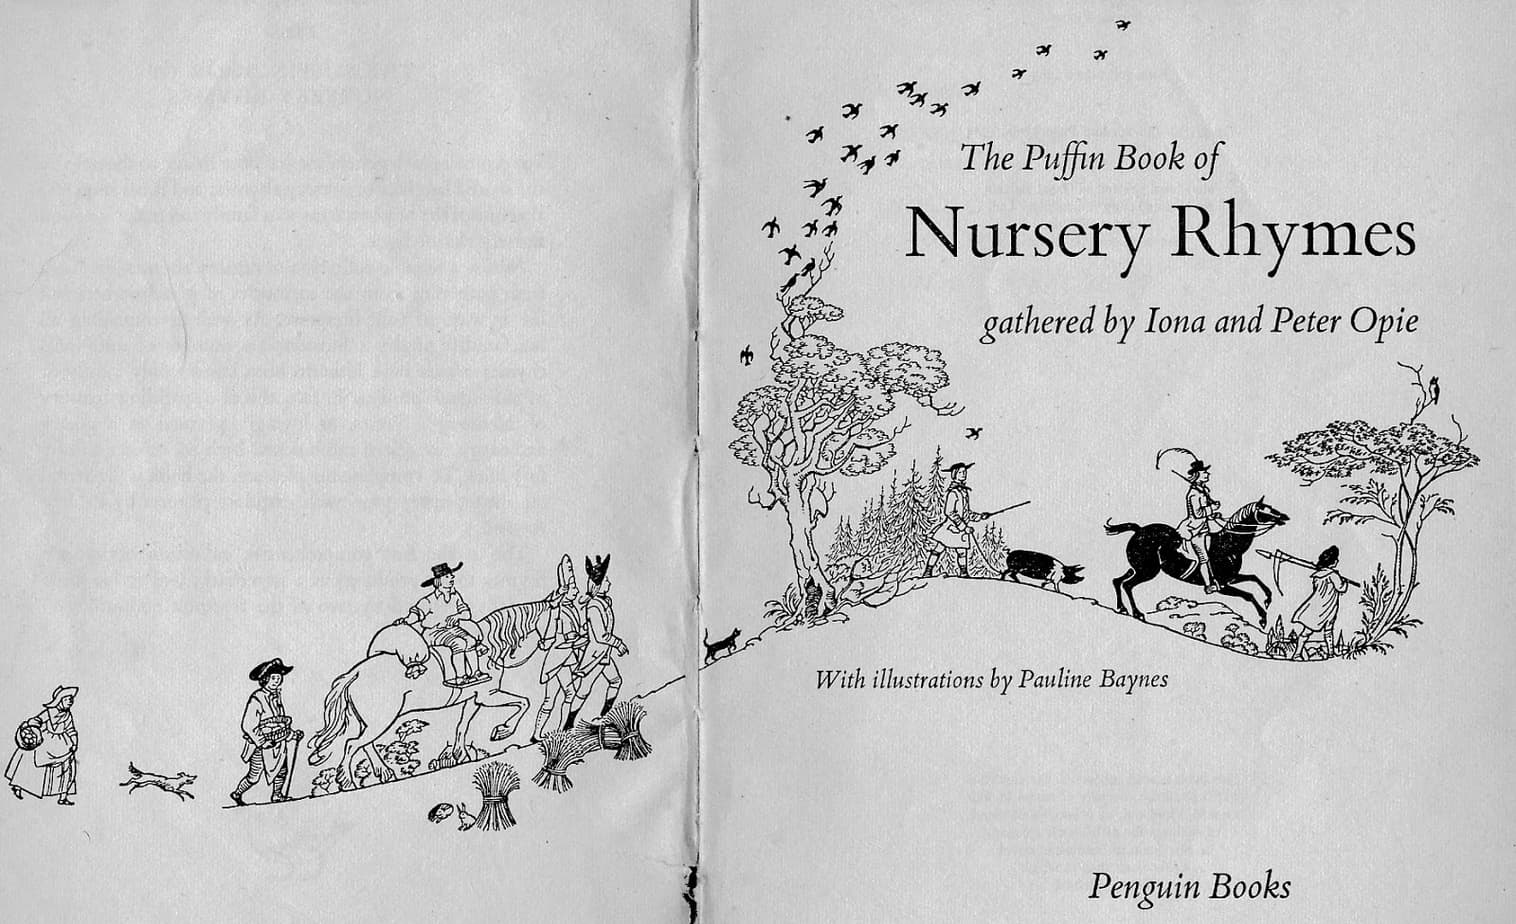 The Puffin Book Of Nursery Rhymes,  Iona and Peter Opie, Ill. Pauline Baynes (Penguin Books Ltd, 1963) frontispiece